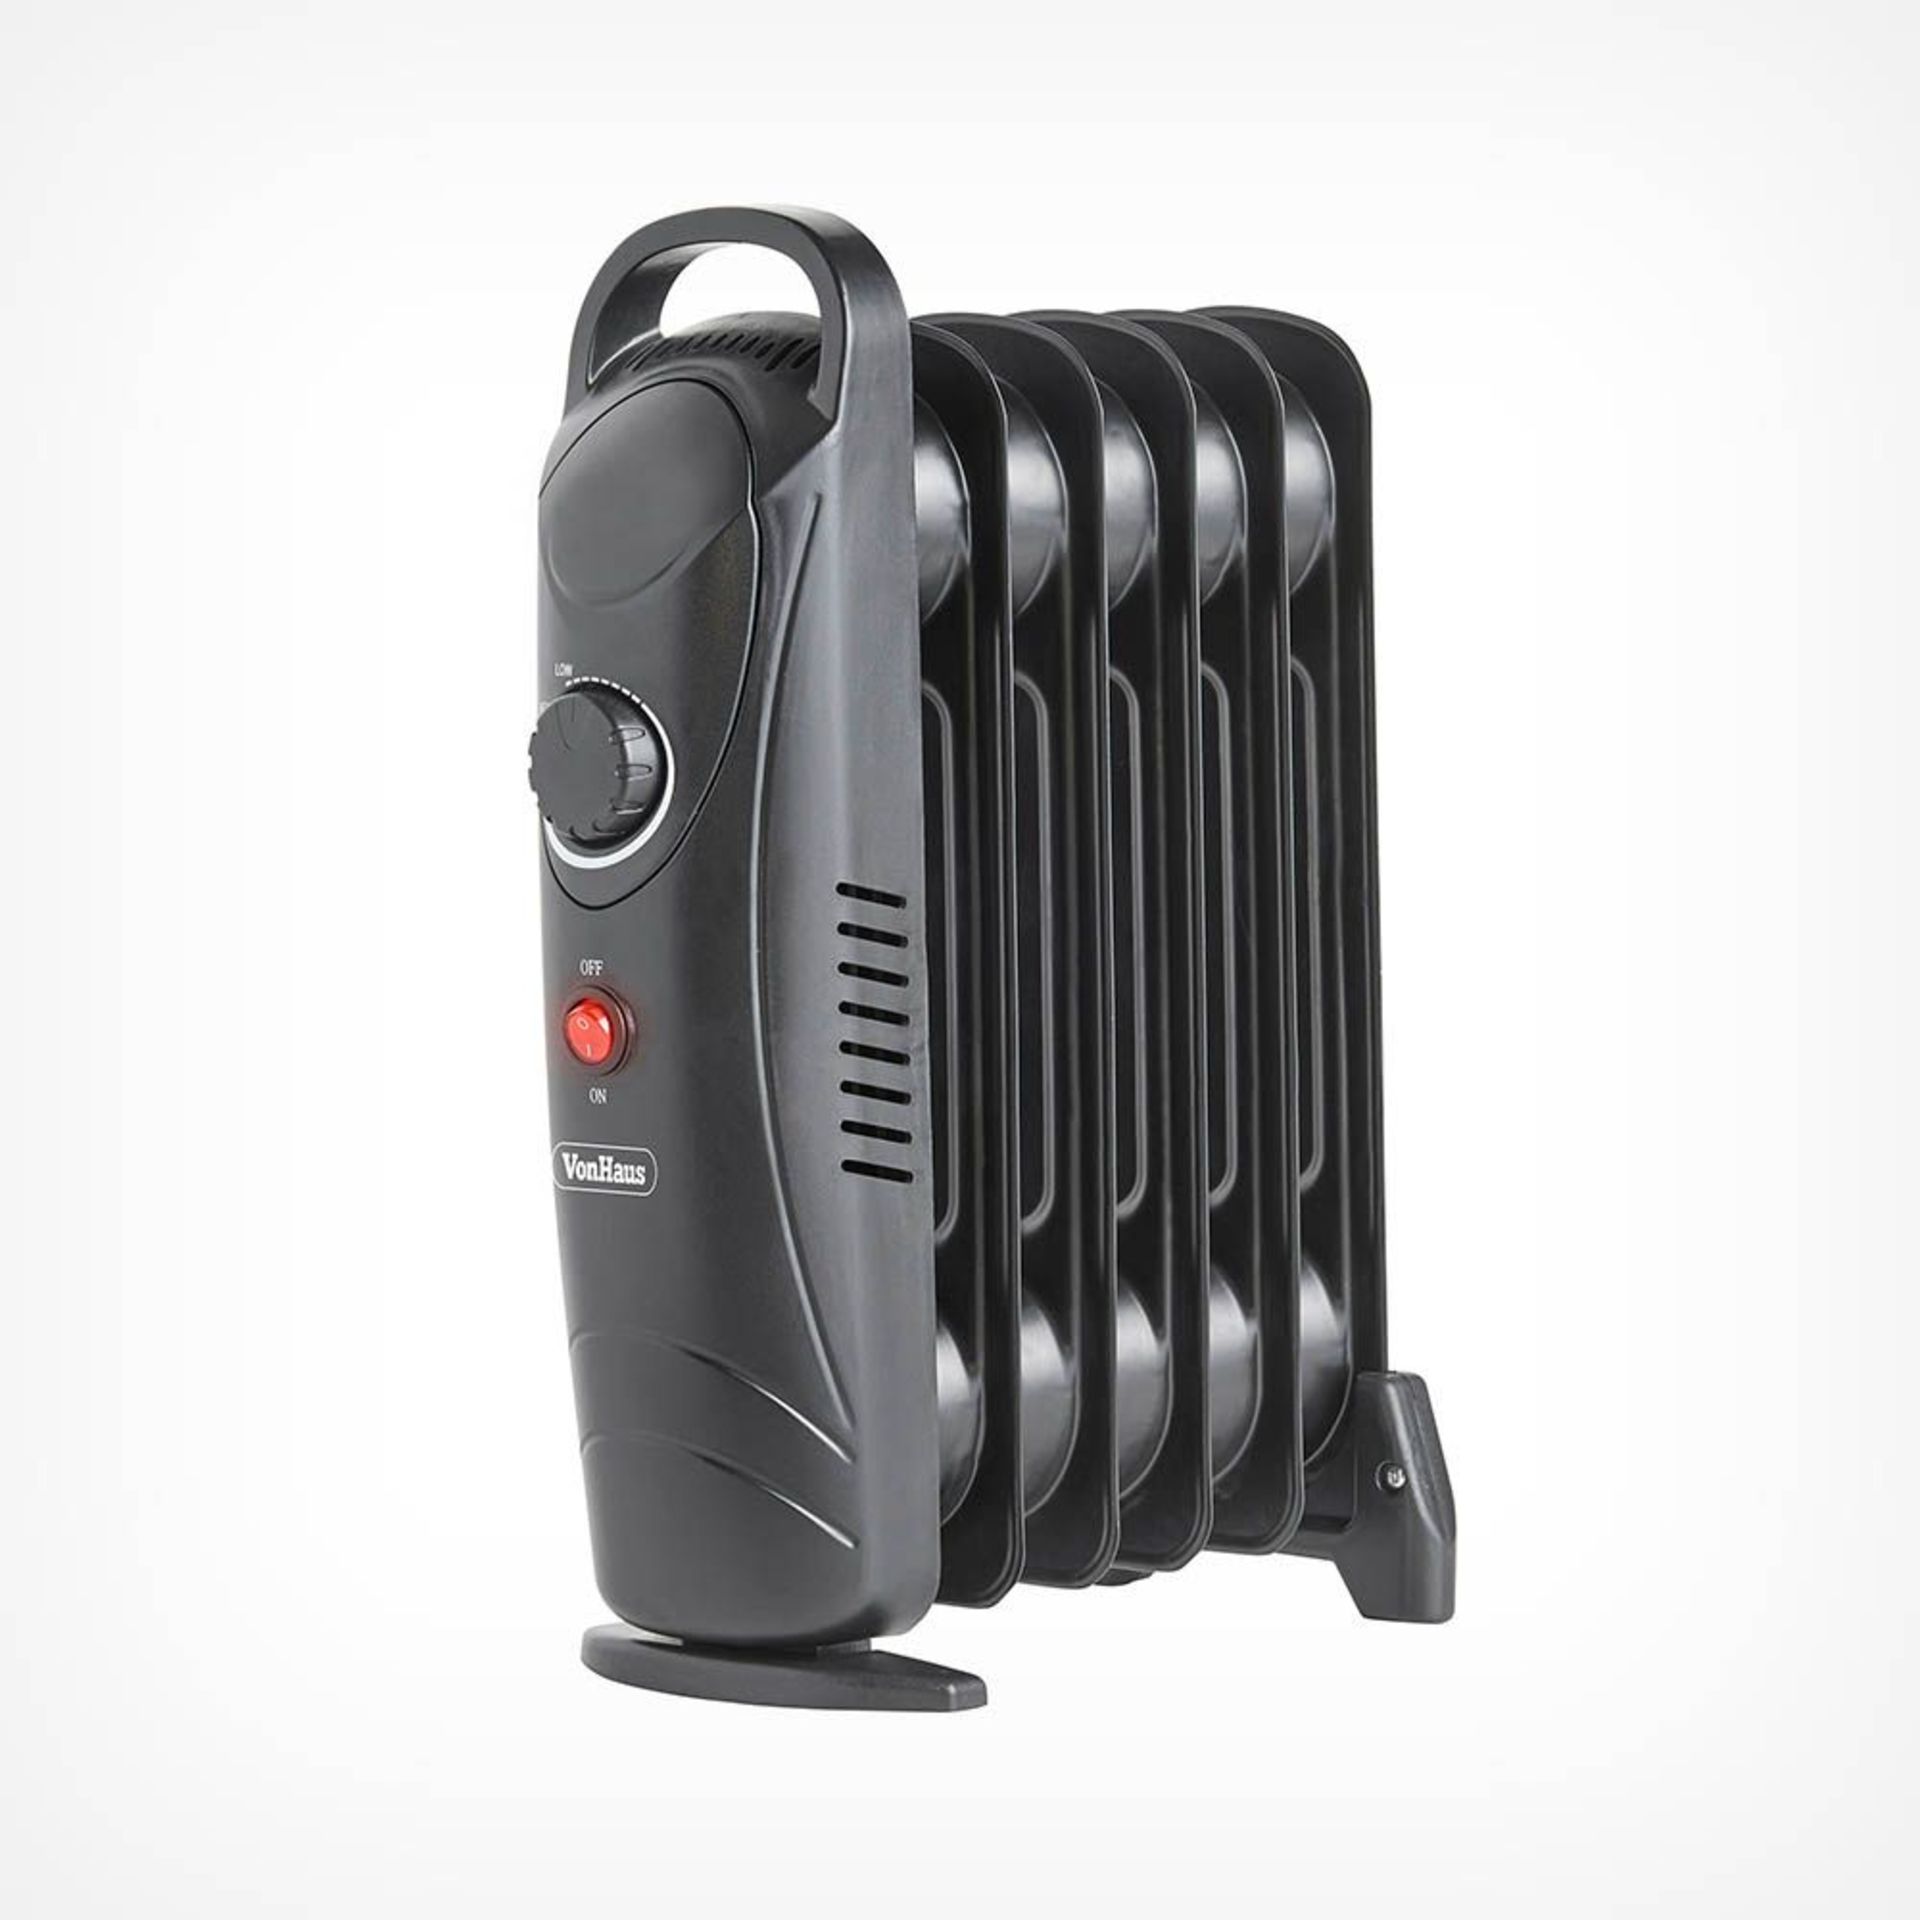 (H189) 6 Fin 800W Oil Filled Radiator - Black Compact yet powerful 800W radiator with 6 oil-fi...(